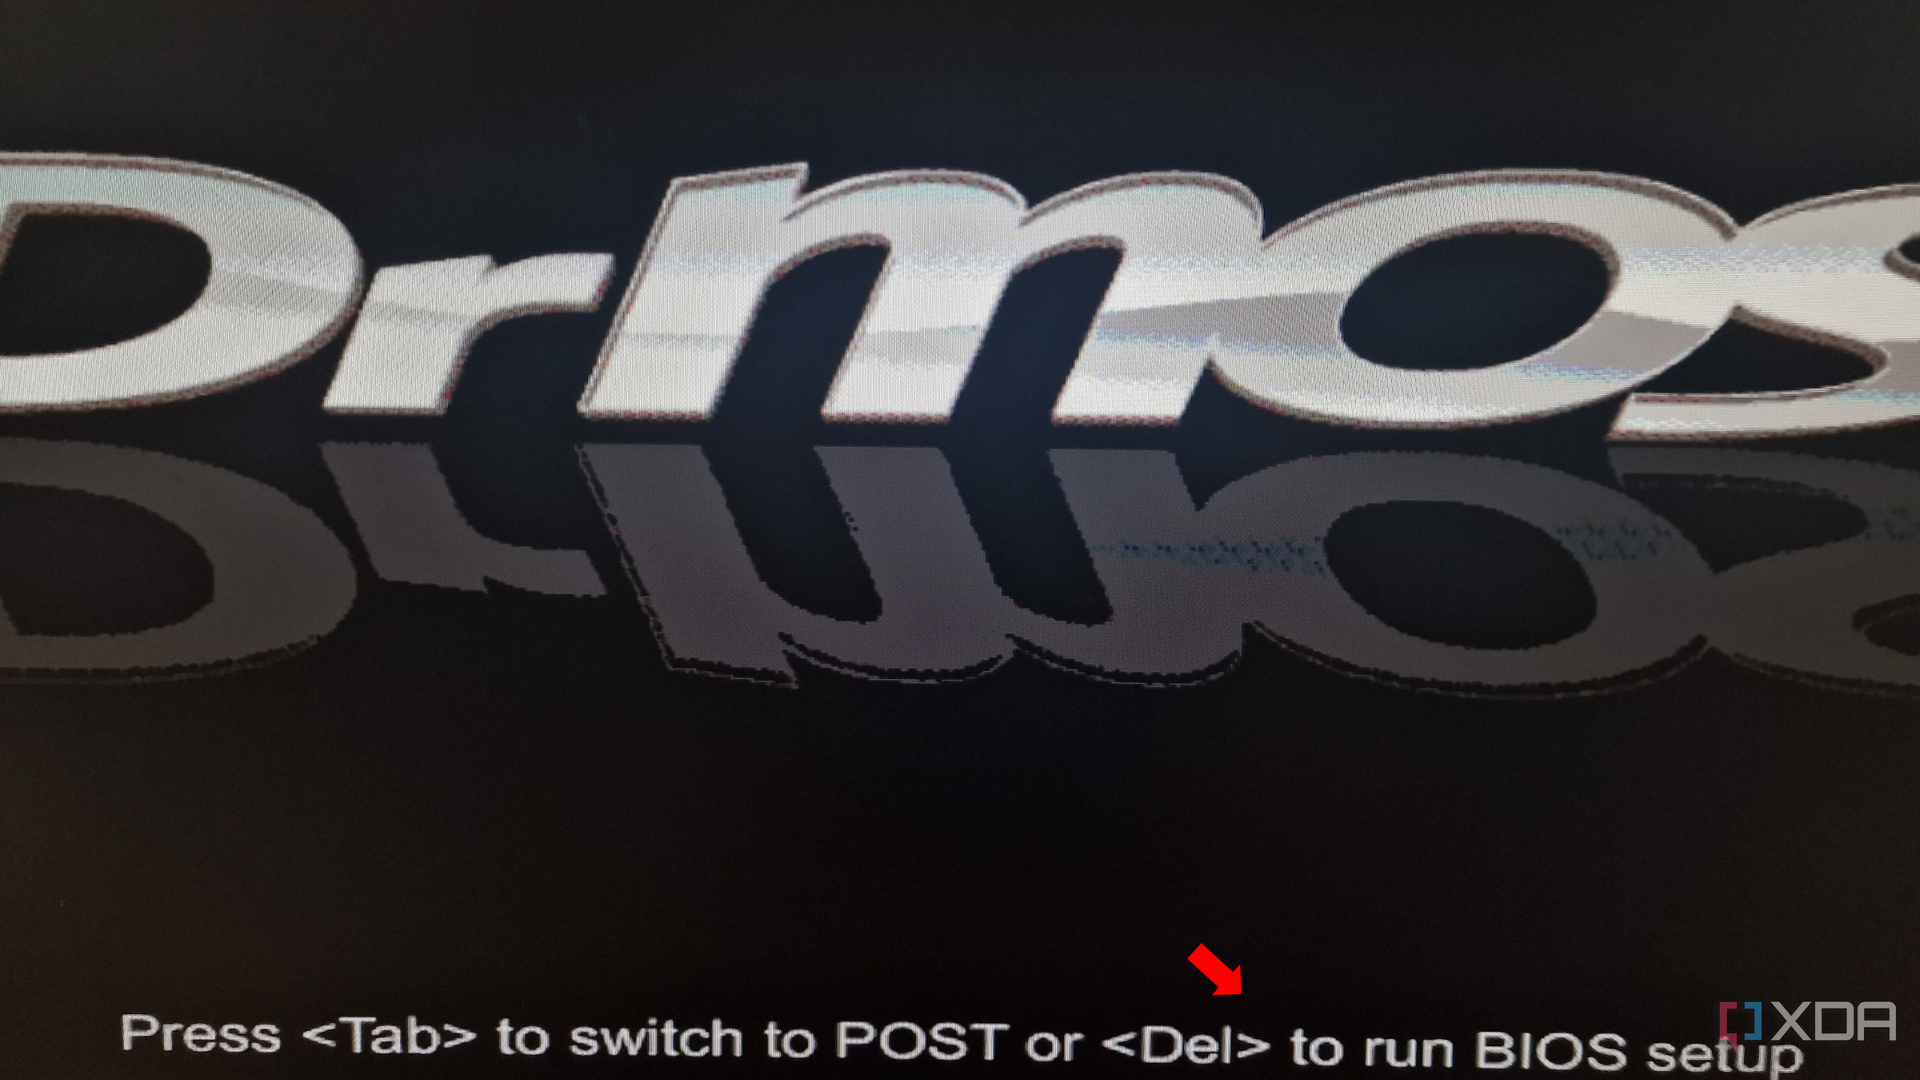 A BIOS boot screen displaying the message "Press Tab to switch to POST or Del to run BIOS setup."